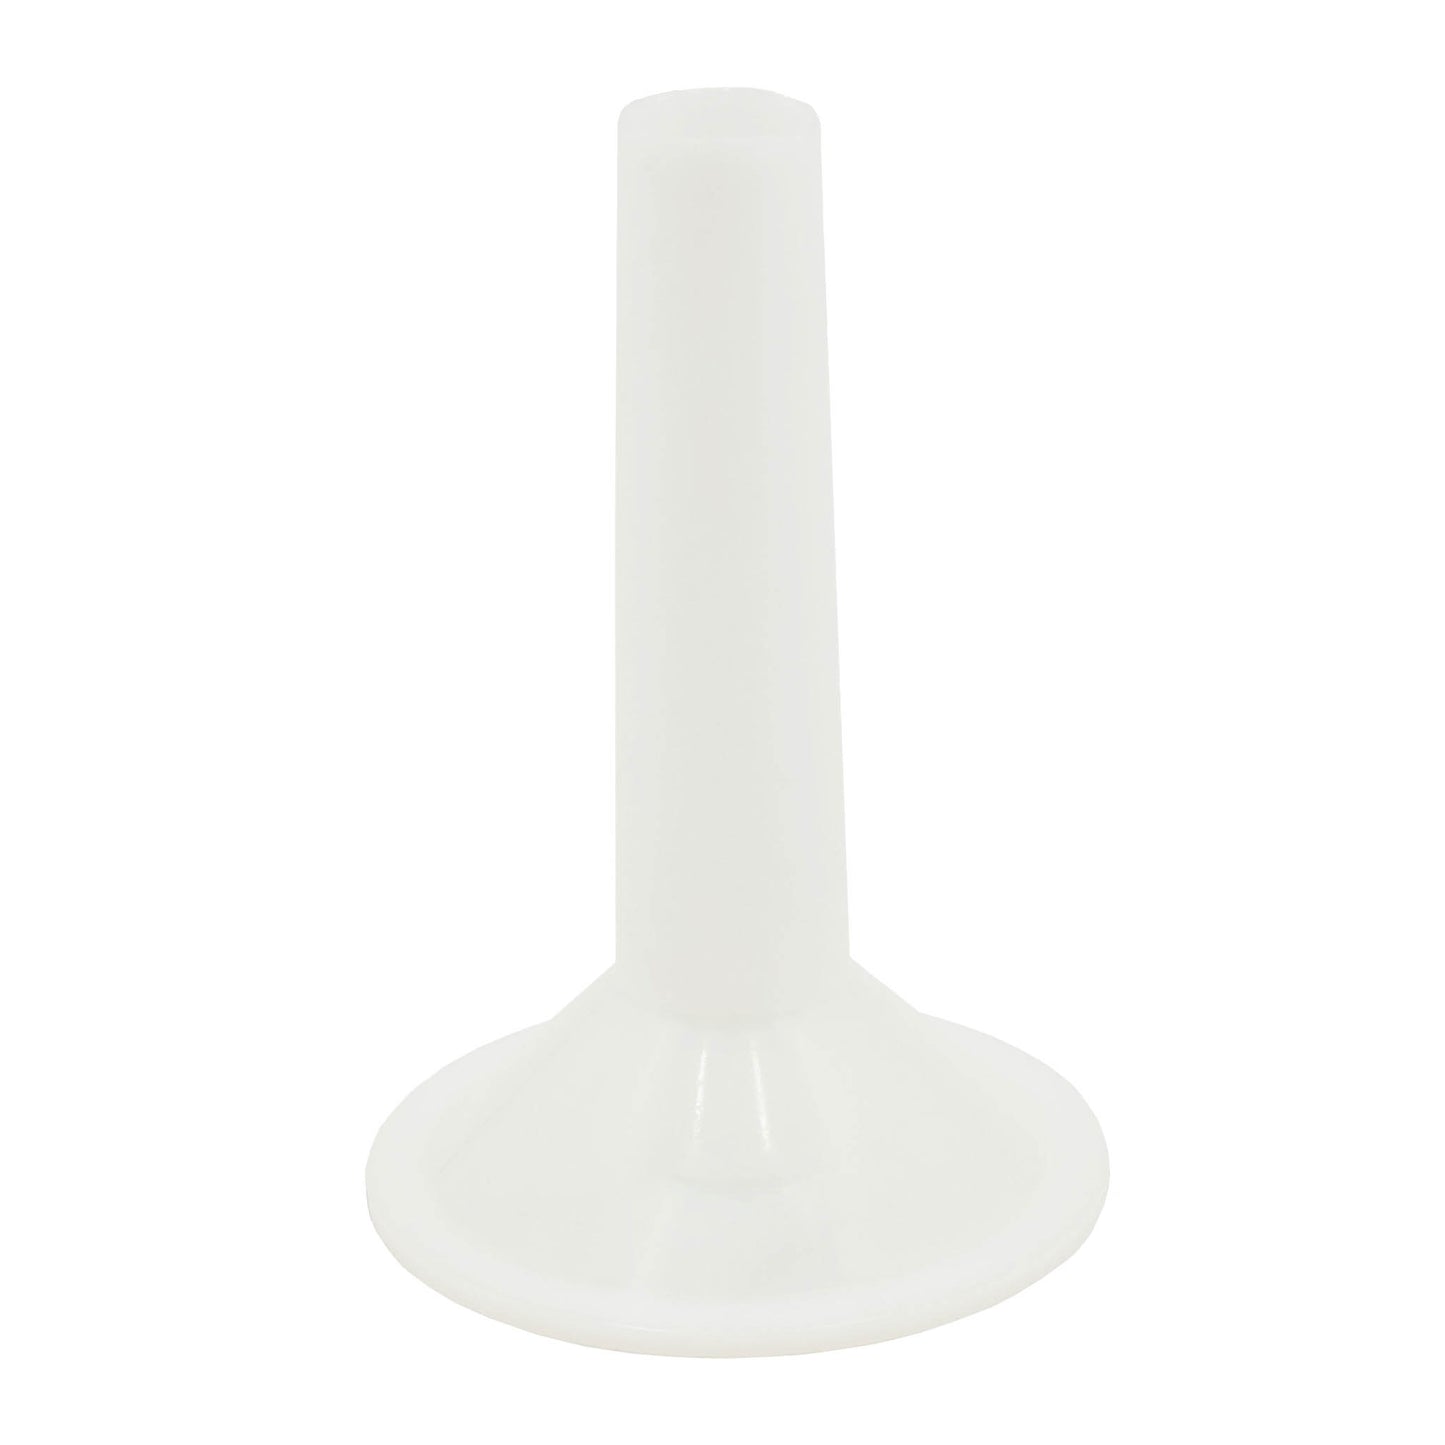 white food grade plastic salami and sausage mincer funnel for size 32 mincers 20mm in diameter.